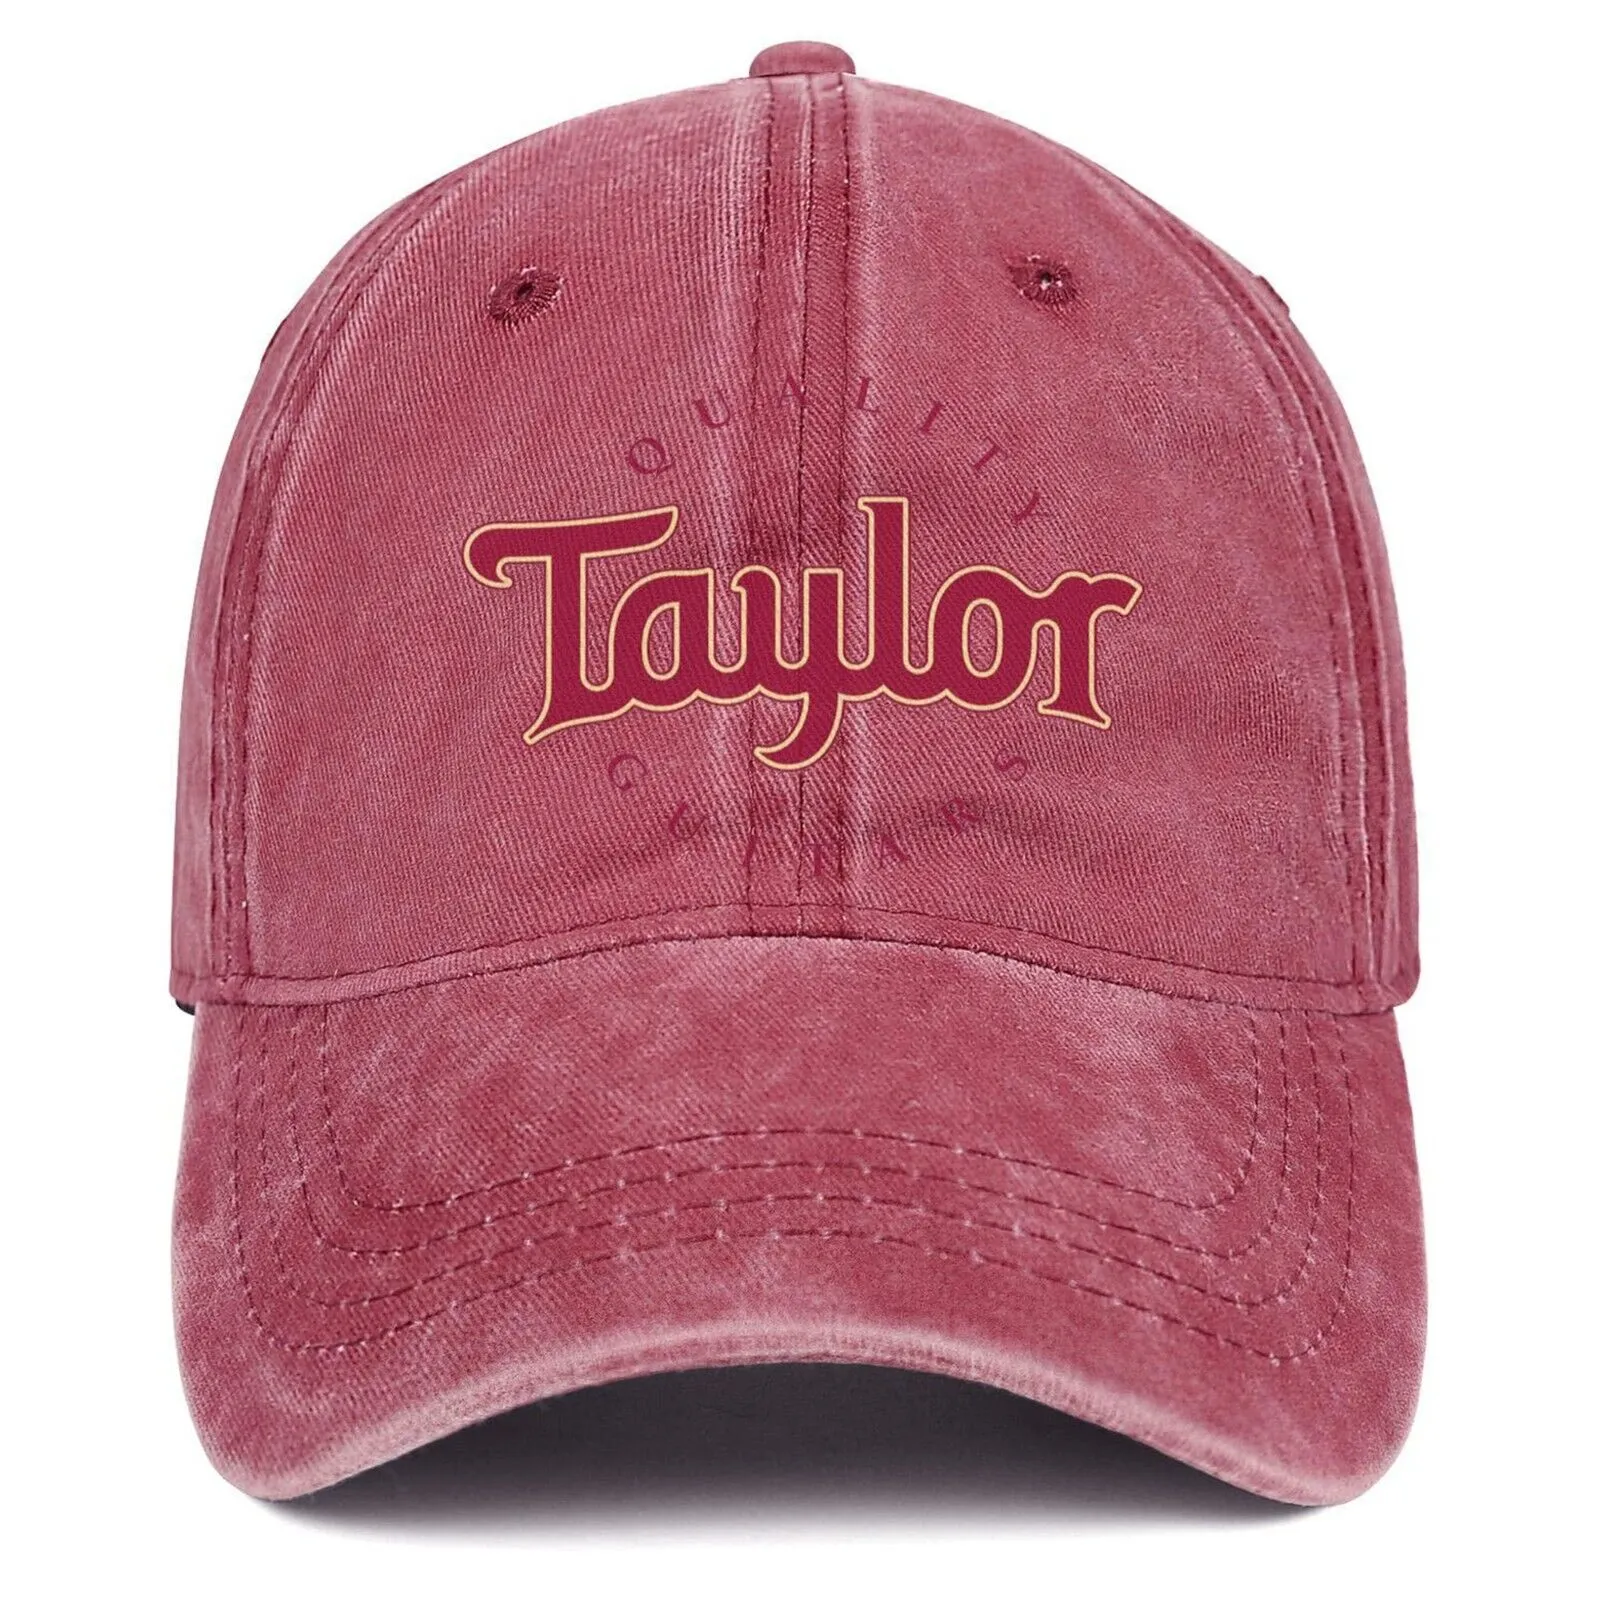 Acoustic Guitars Taylor Baseball Cap Stitched Rose Red Snapback Hat New